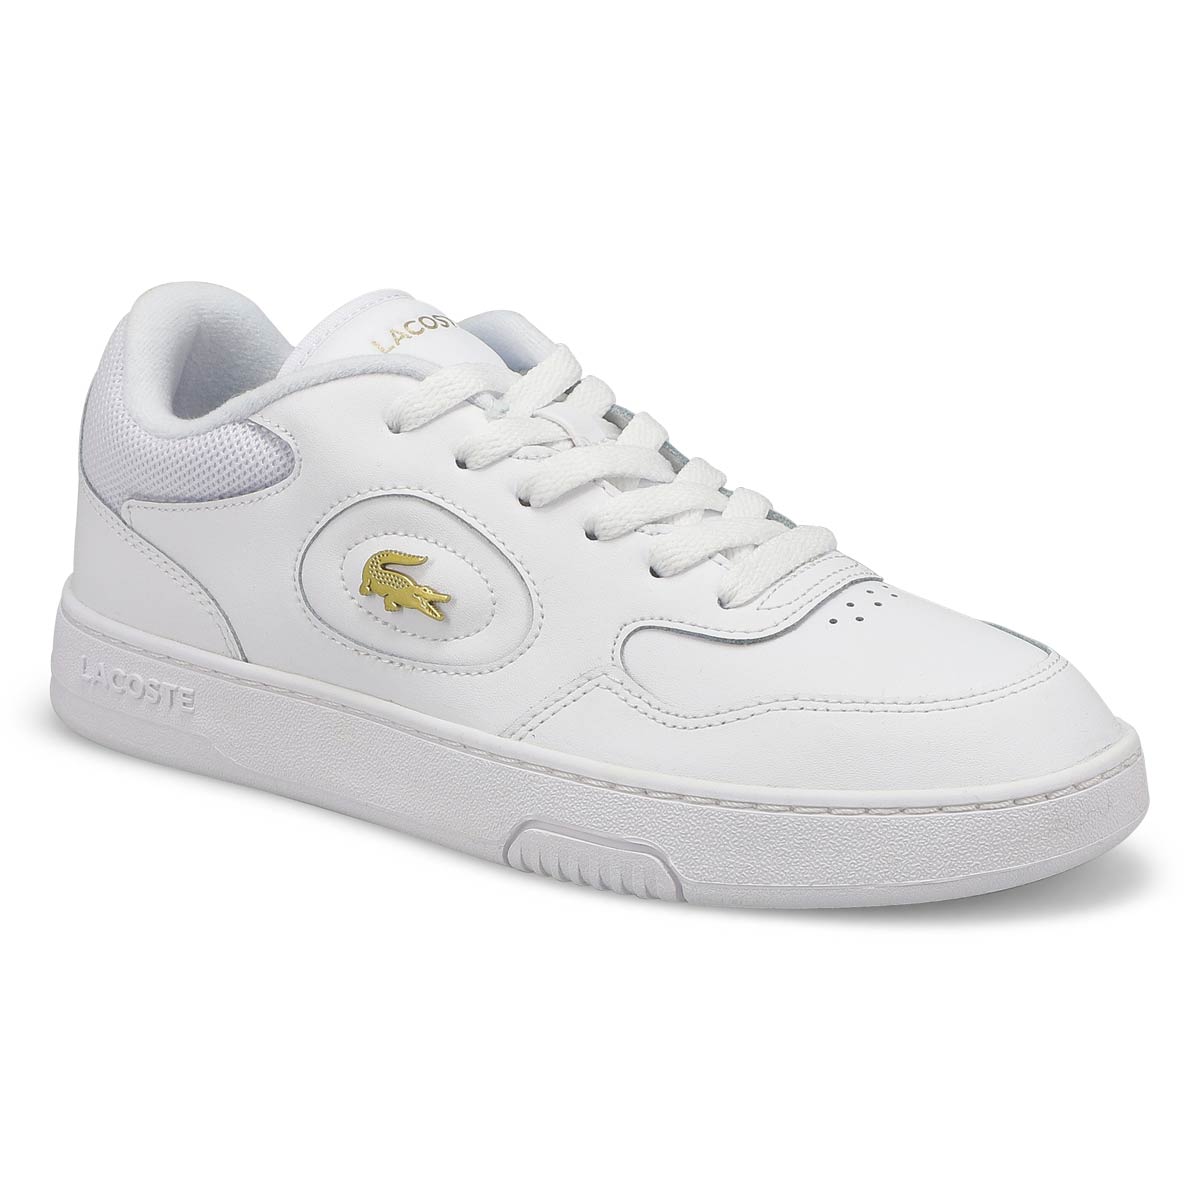 Womens Lineset Lace Up Fashion Sneaker - White/Gold